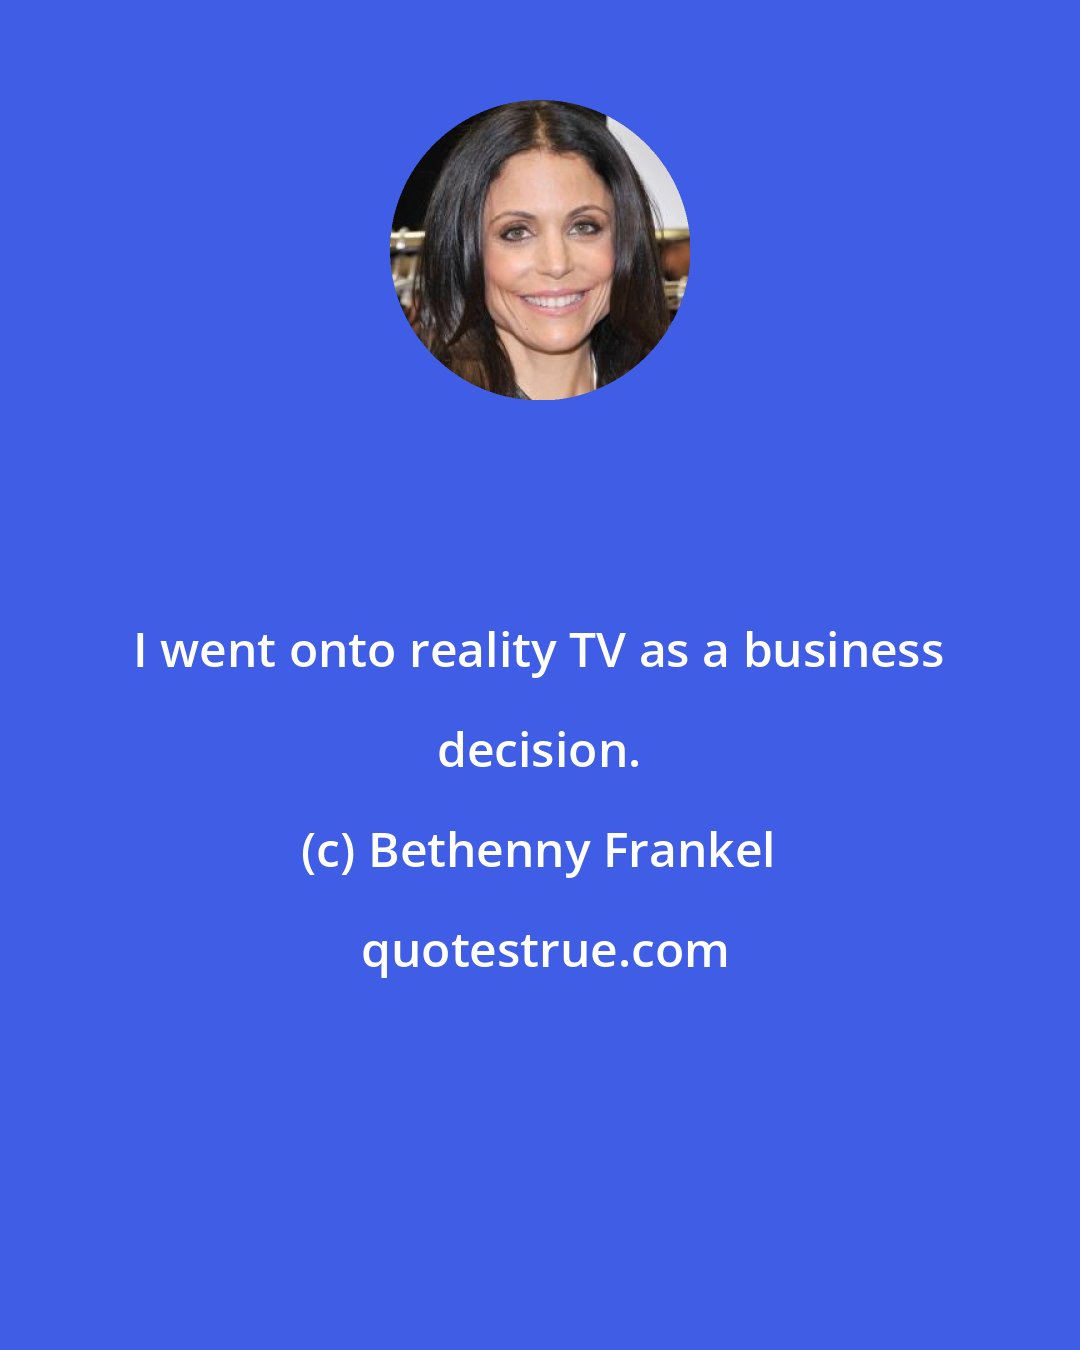 Bethenny Frankel: I went onto reality TV as a business decision.